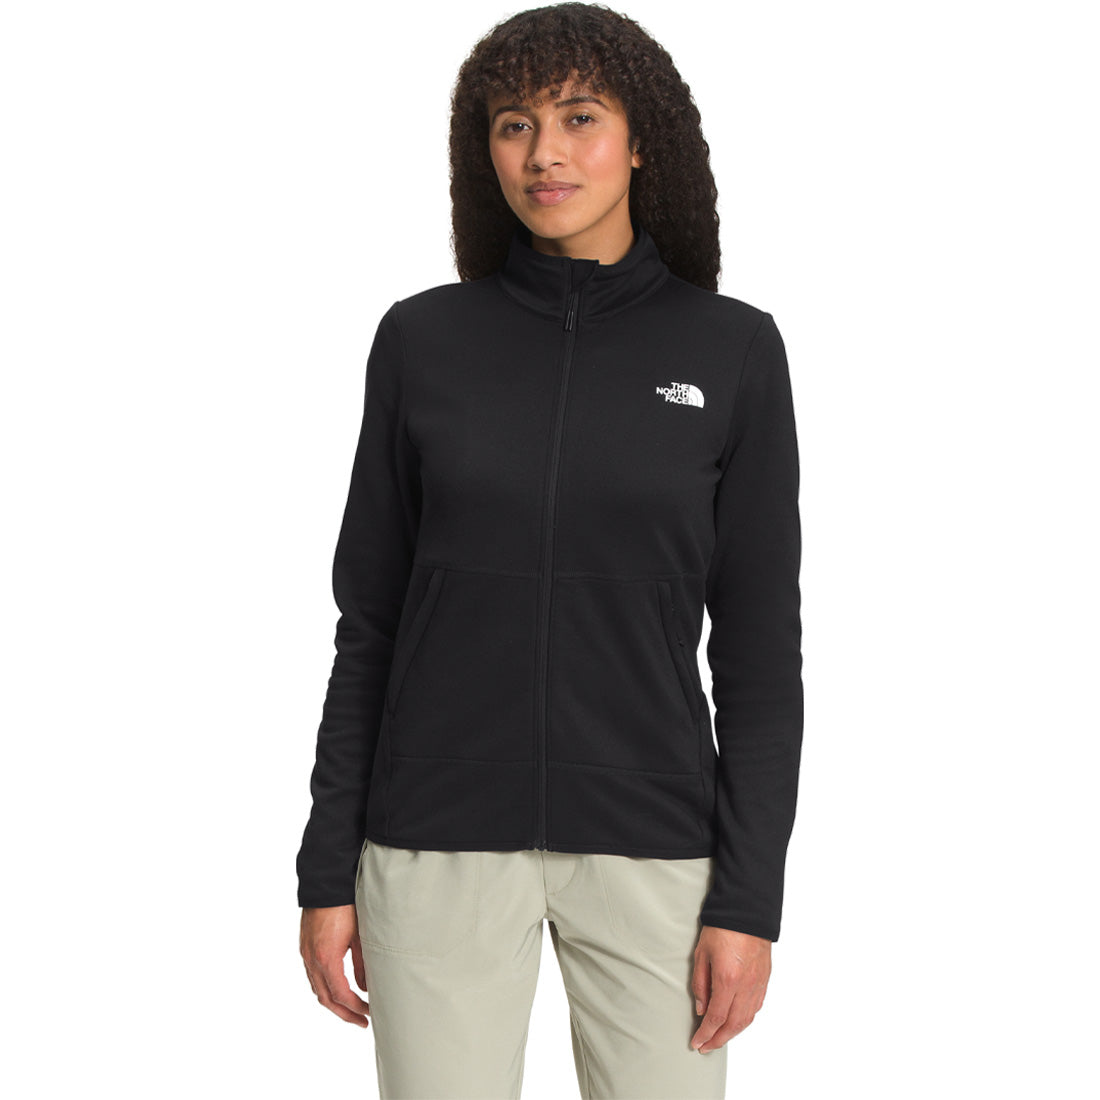 The North Face Canyonlands Full Zip Jacket - Women's